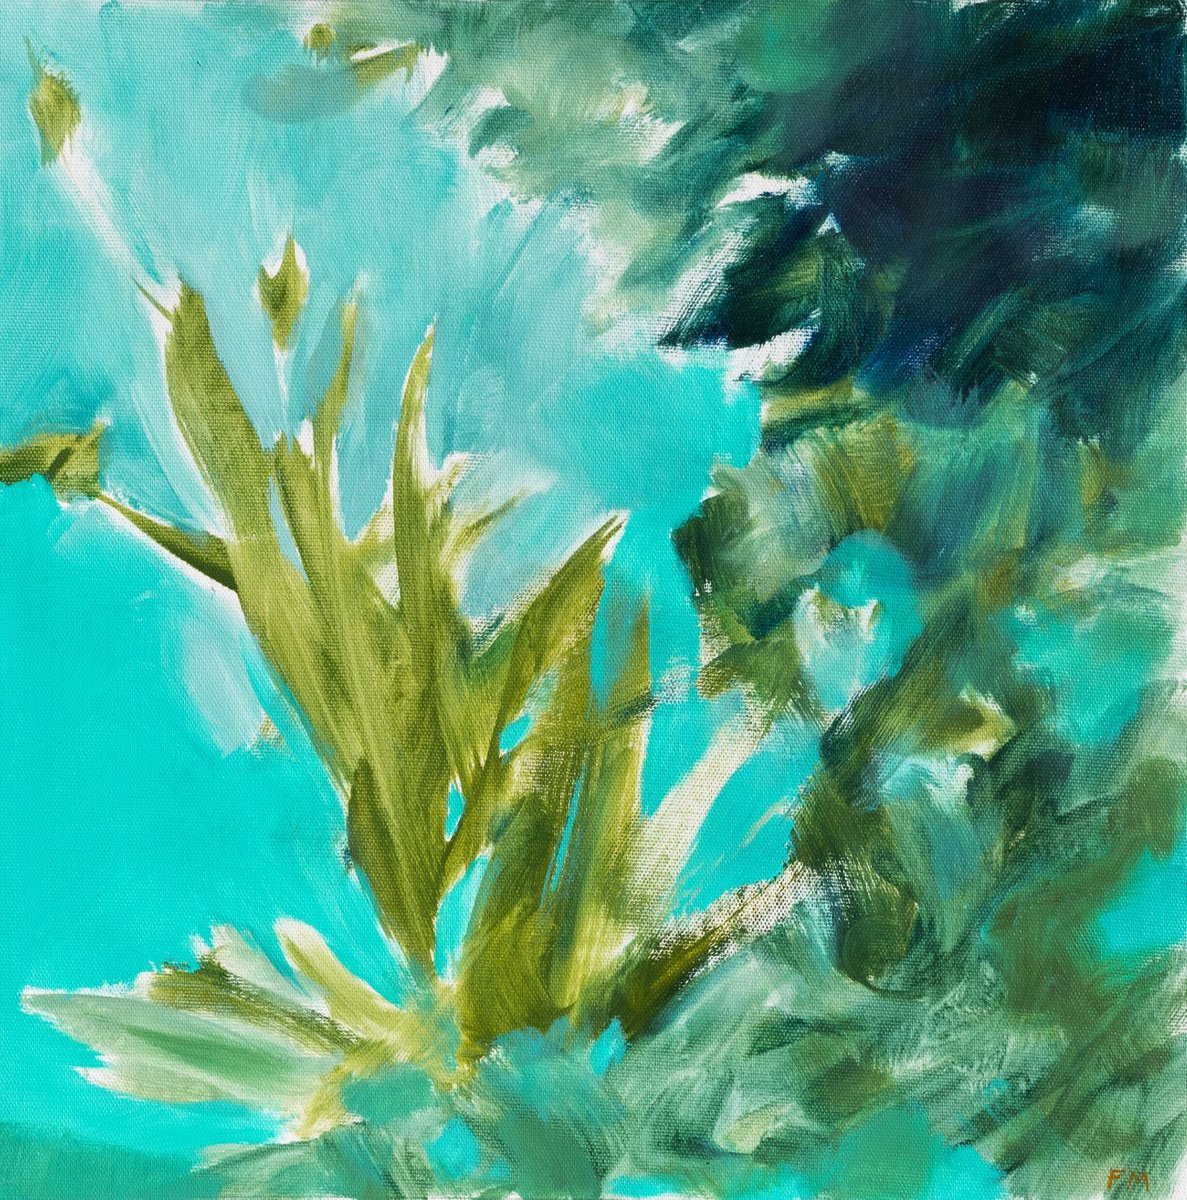 Mediterrane 2 - abstract landscape in turquoise - oil painting Modern Contemporary Wall a... by Fabienne Monestier